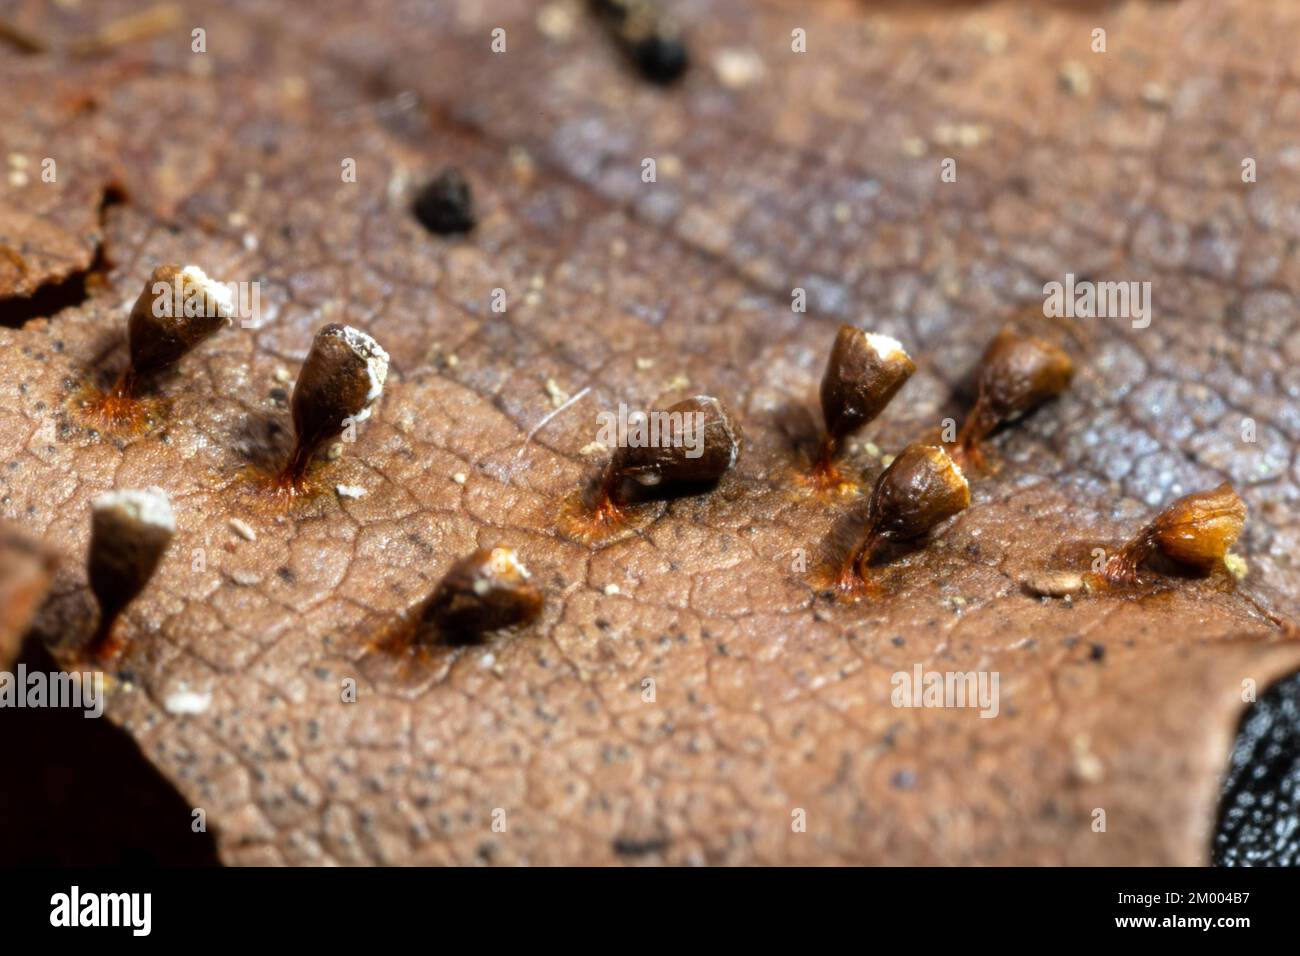 Craterium minutum several brown stemmed fruiting bodies on brown leaf Stock Photo